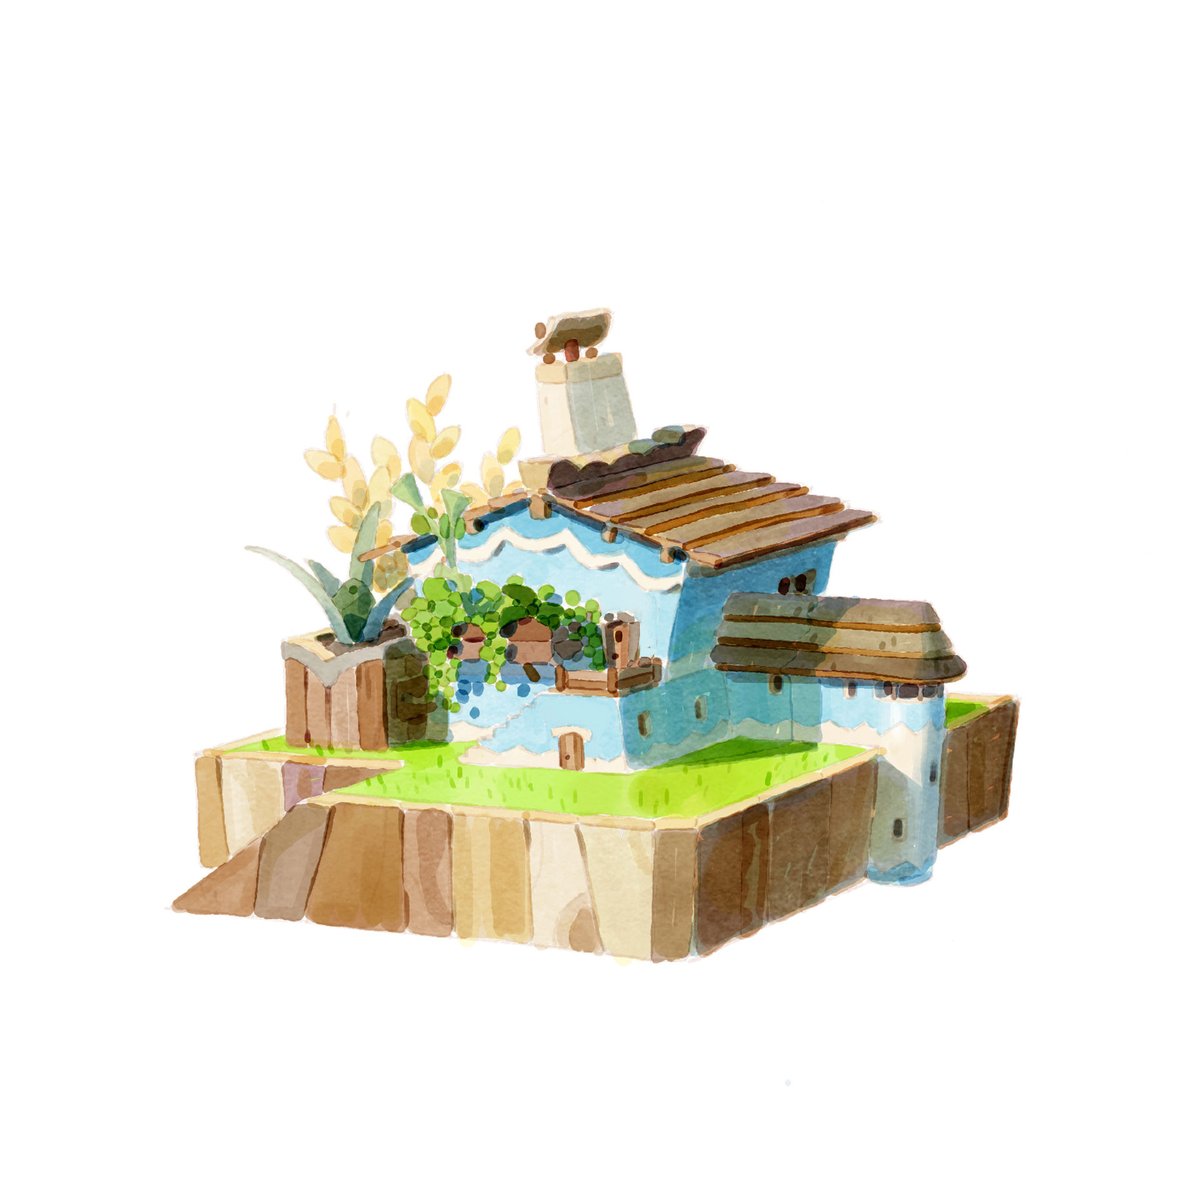 「lil houses ( brushes are kyle webster's 」|AlexandreDiboineのイラスト